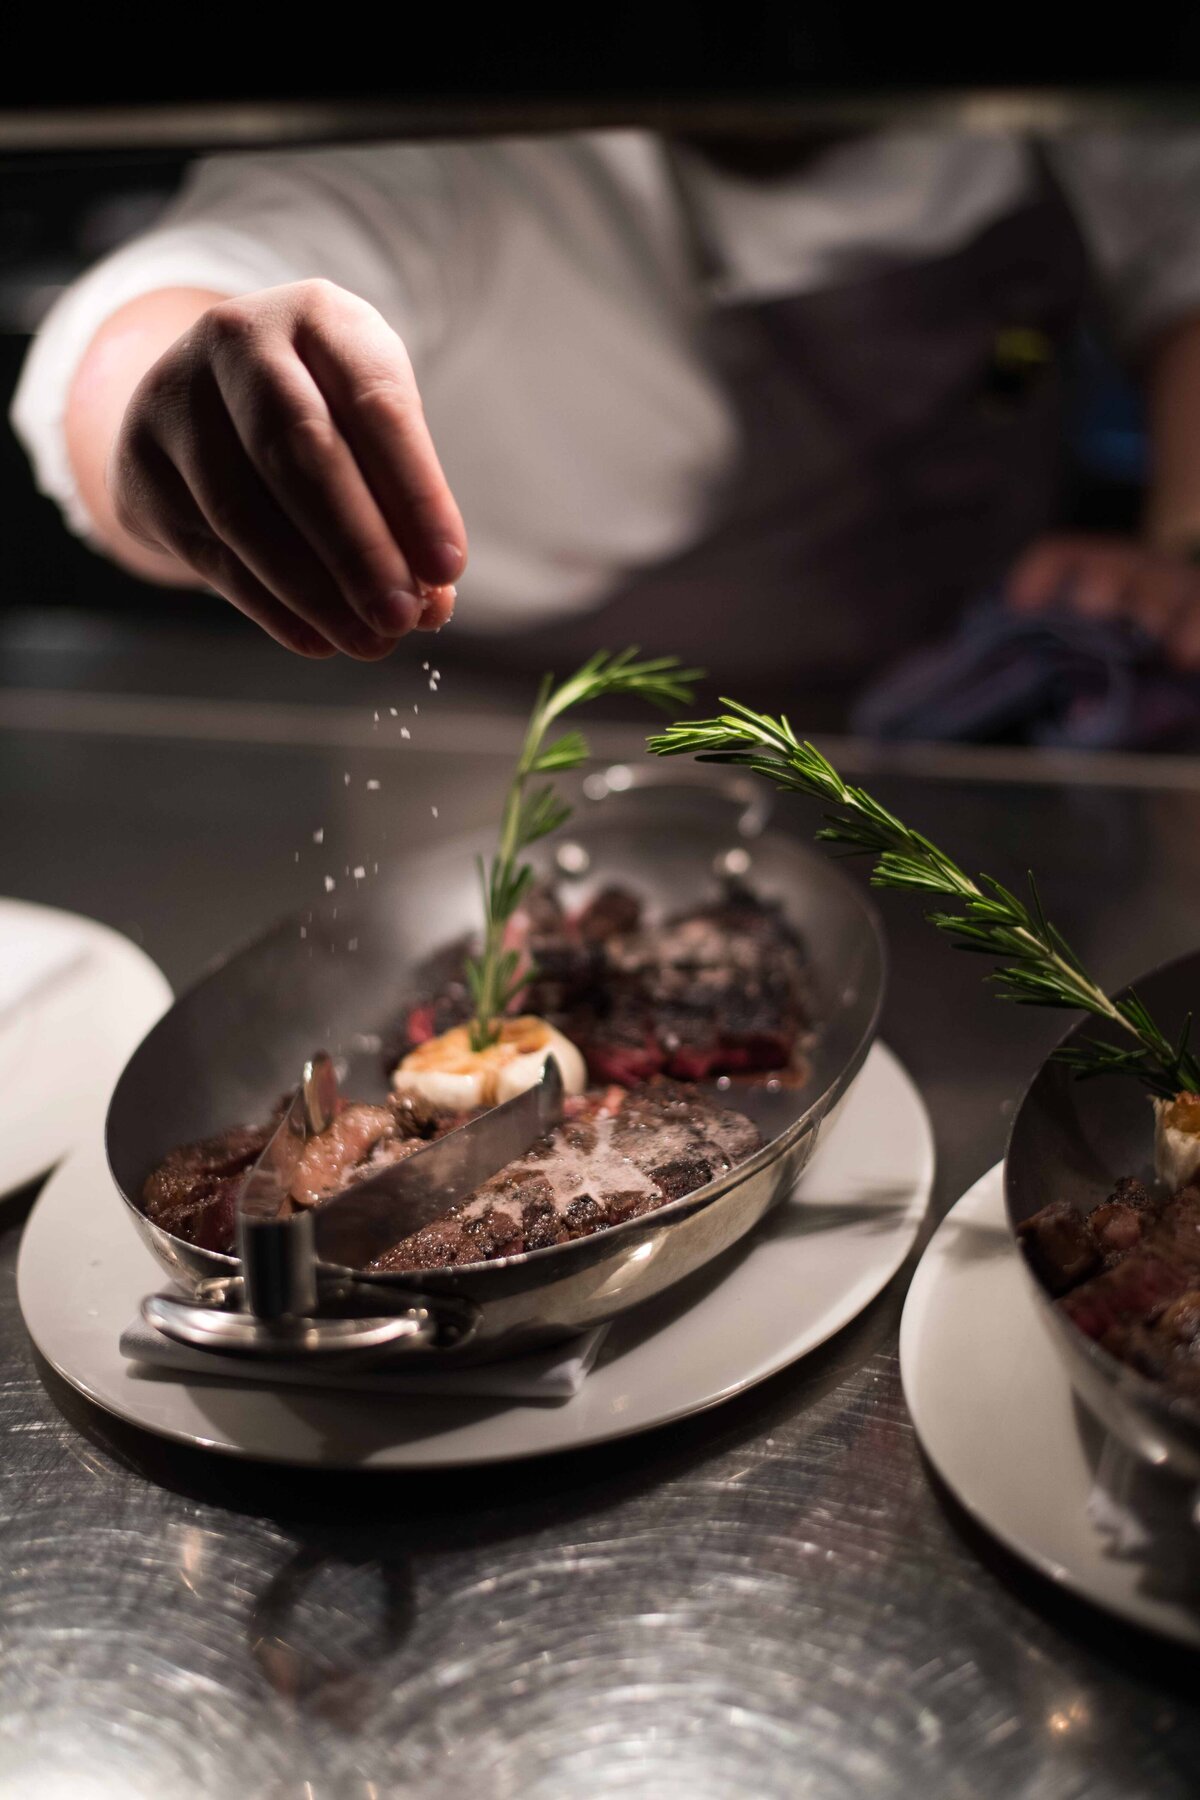 An image of a chef's hand sprinkling salt on a steak with a sprig of rosemary